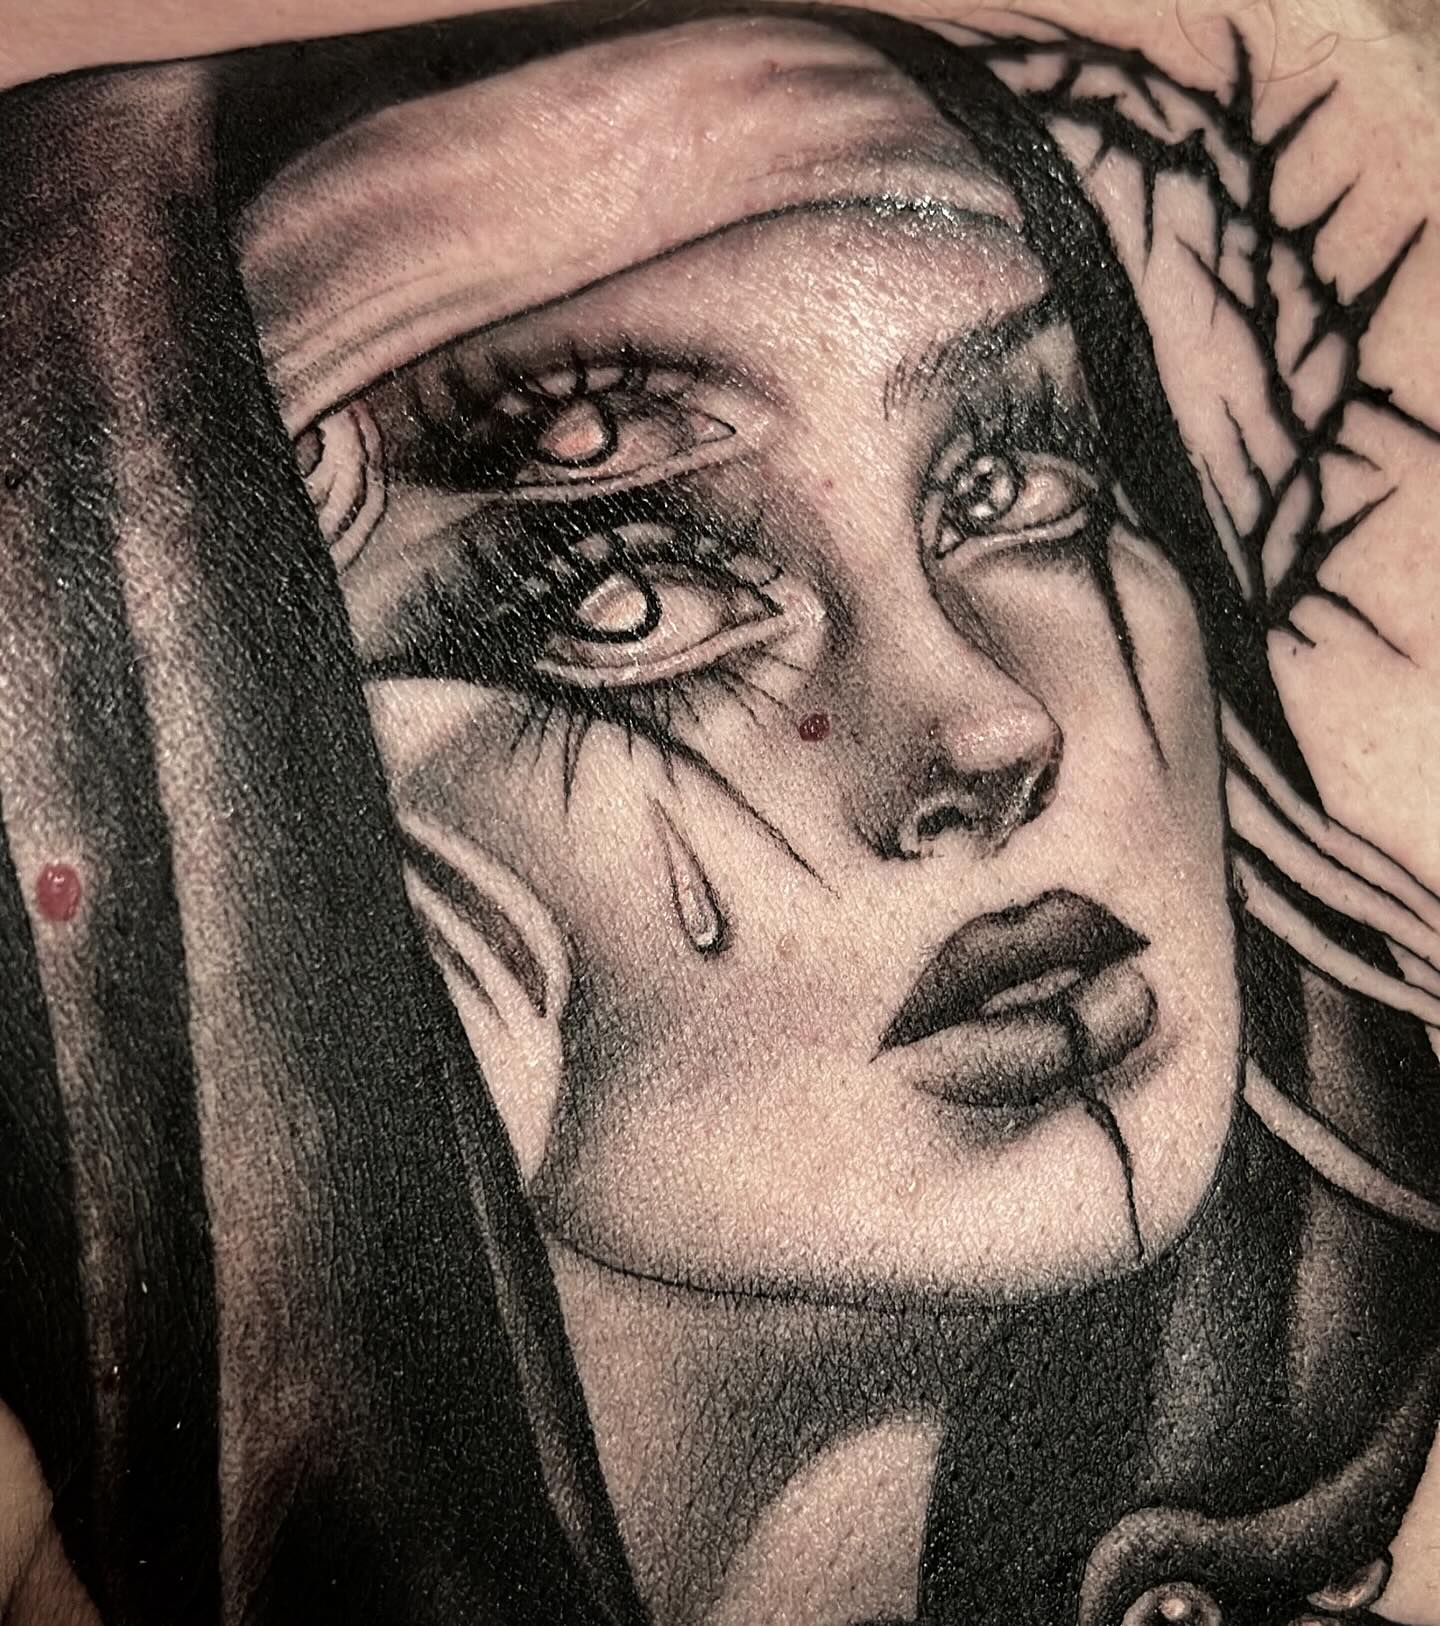 I had SOOO much fun with this demonic nun piece at the @villainarts @minneapolistattooartsfestival !! If you’re interested in something like this, hit the link in my bio and get scheduled asap!! #nun #nuntattoo #demonictattoo #tattoosnob #inkedmag #skinart_mag #skinart_traditional #flatstattoo #traditional #traditionaltattoo #neotraditional #neotraditionaltattoo #mavericktattoomercantile  #inkmaster #cttattoo #wheresthecocainecrissangel #youcouldadoneadoor